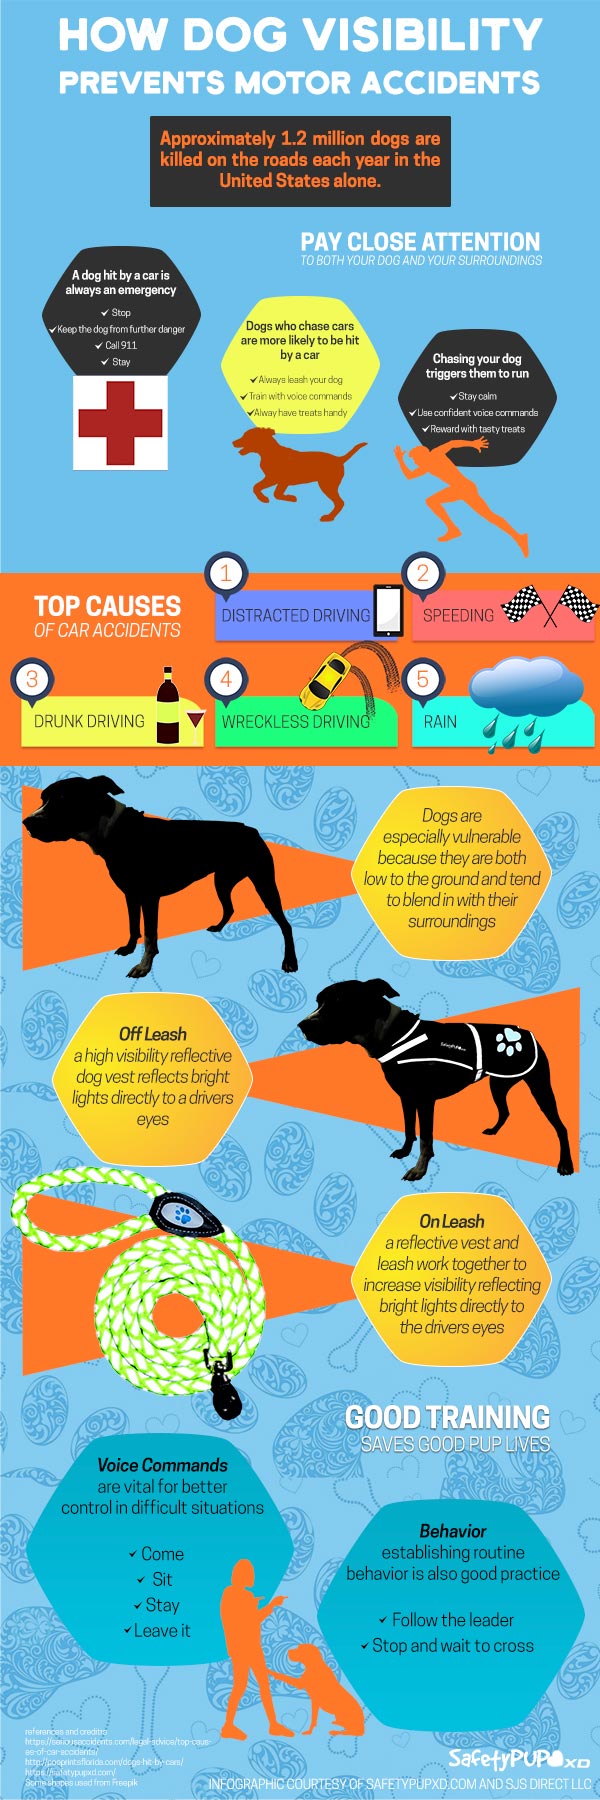 reflective dog vest how visibility prevents motor accidents with cars infographic